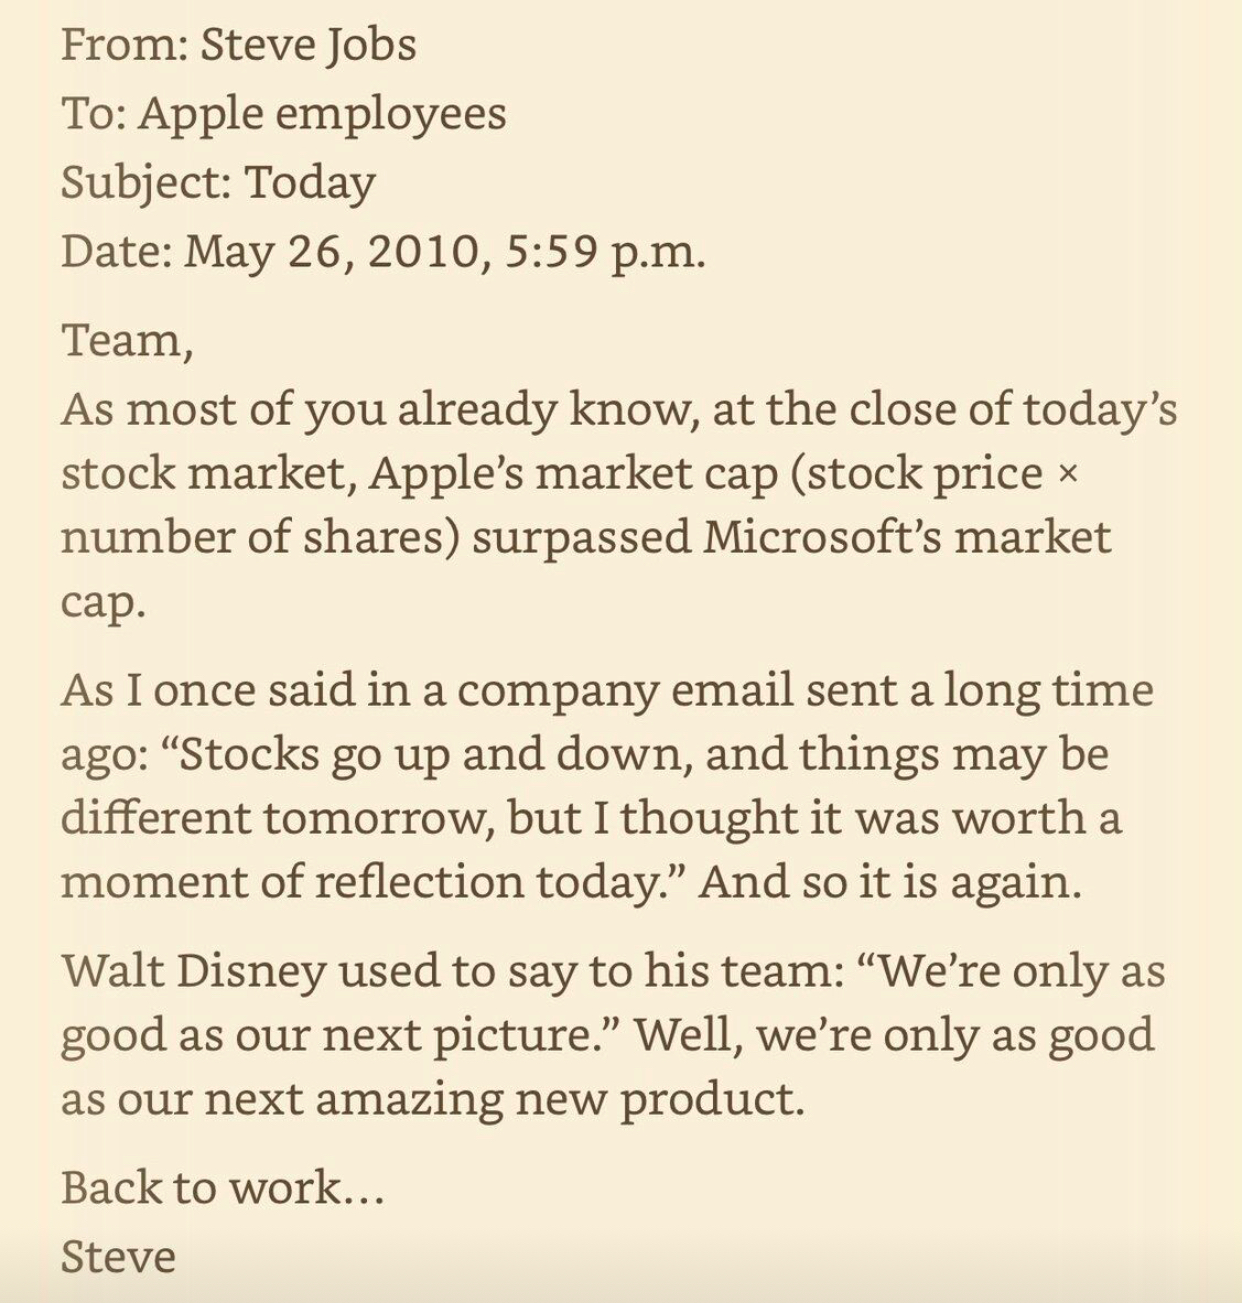 Late Steve Jobs said it all in this mail.  “We’re only as good as our next amazing new product.” and unfortunately for Tim Cook, he will never unde...